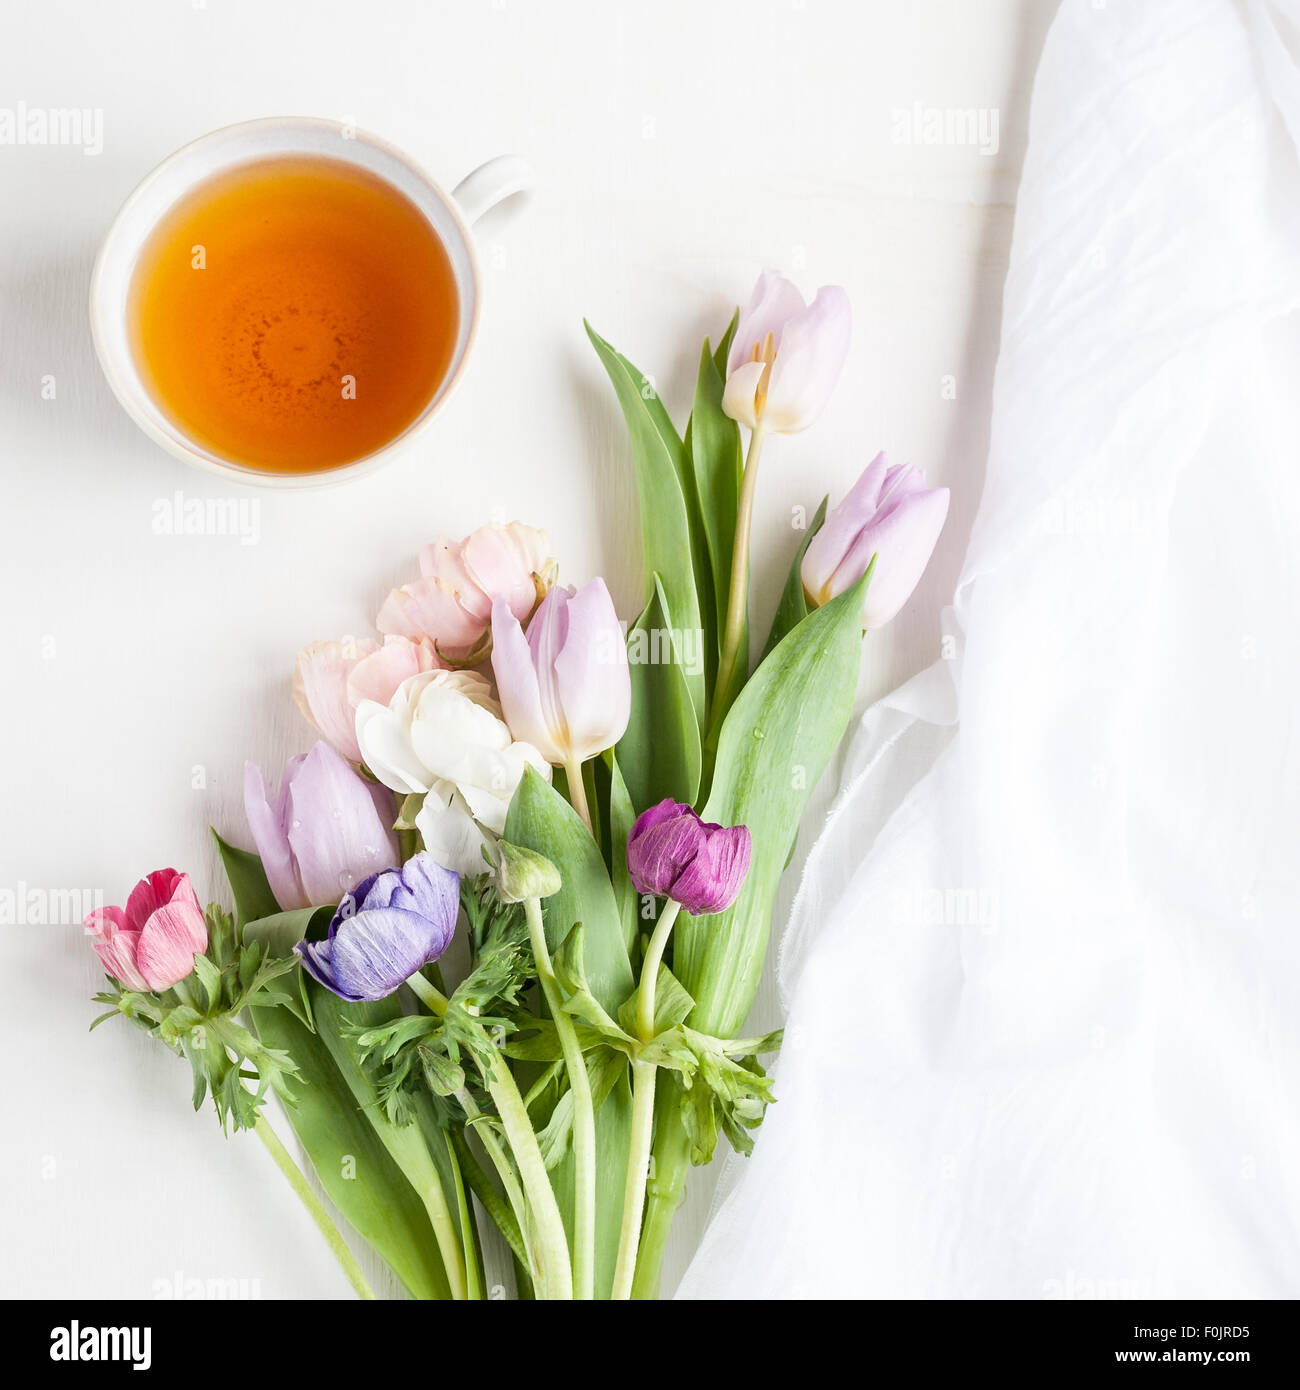 a bunch of spring flowers, anemones and tulips, with a cup of tea and some fabric Stock Photo